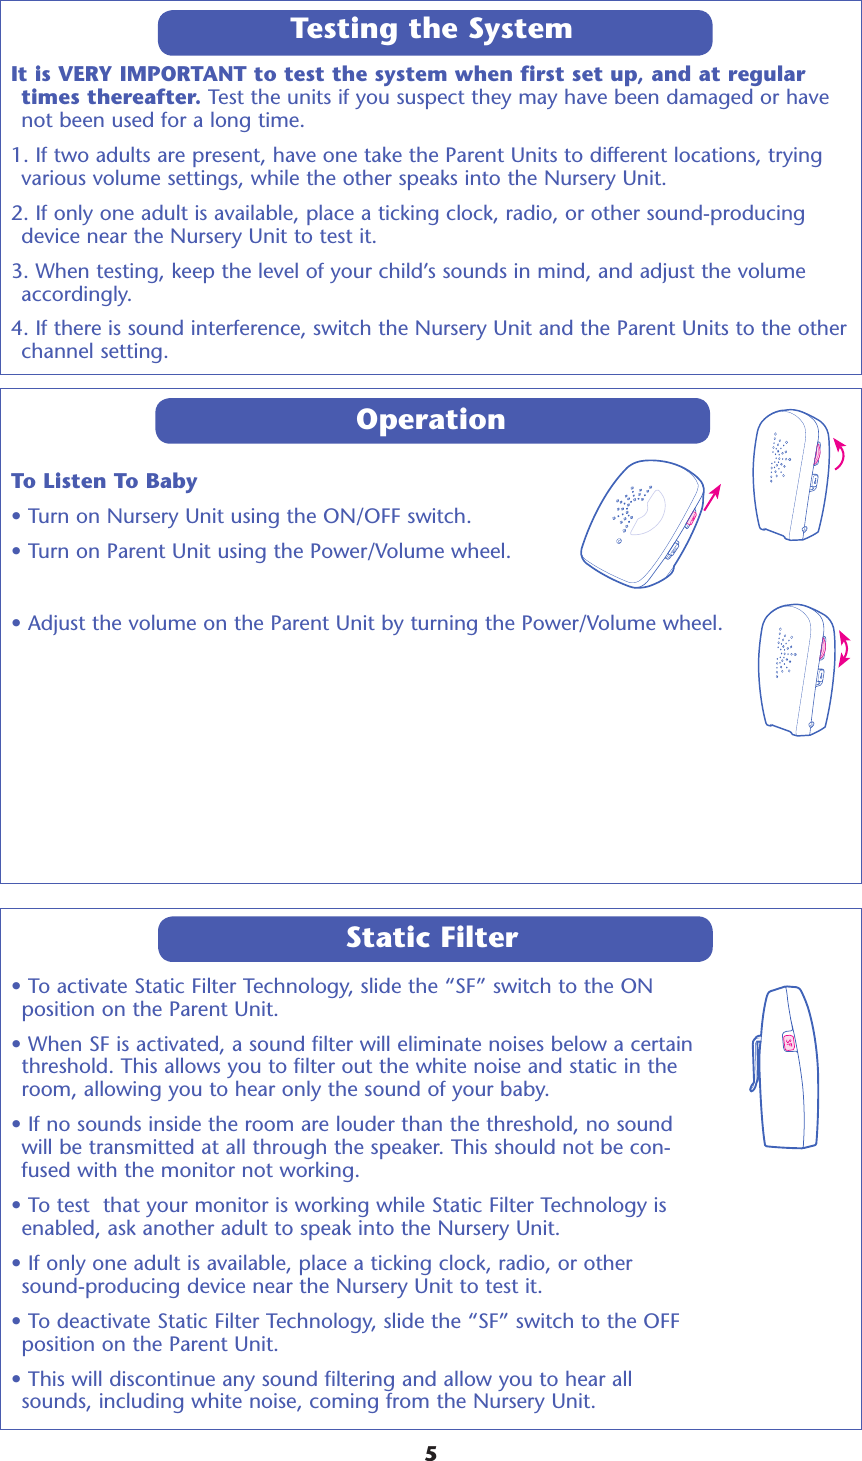 It is VERY IMPORTANT to test the system when first set up, and at regular times thereafter. Test the units if you suspect they may have been damaged or have not been used for a long time. 1. If two adults are present, have one take the Parent Units to different locations, trying various volume settings, while the other speaks into the Nursery Unit. 2. If only one adult is available, place a ticking clock, radio, or other sound-producing device near the Nursery Unit to test it. 3. When testing, keep the level of your child’s sounds in mind, and adjust the volume accordingly. 4. If there is sound interference, switch the Nursery Unit and the Parent Units to the other channel setting.OperationTo Listen To Baby• Turn on Nursery Unit using the ON/OFF switch.• Turn on Parent Unit using the Power/Volume wheel.• Adjust the volume on the Parent Unit by turning the Power/Volume wheel.  Testing the System5• To activate Static Filter Technology, slide the “SF” switch to the ON position on the Parent Unit.  • When SF is activated, a sound filter will eliminate noises below a certain threshold. This allows you to filter out the white noise and static in the room, allowing you to hear only the sound of your baby. • If no sounds inside the room are louder than the threshold, no sound will be transmitted at all through the speaker. This should not be con-fused with the monitor not working. • To test  that your monitor is working while Static Filter Technology is enabled, ask another adult to speak into the Nursery Unit. • If only one adult is available, place a ticking clock, radio, or other sound-producing device near the Nursery Unit to test it. • To deactivate Static Filter Technology, slide the “SF” switch to the OFF position on the Parent Unit. • This will discontinue any sound filtering and allow you to hear all sounds, including white noise, coming from the Nursery Unit. Static Filter